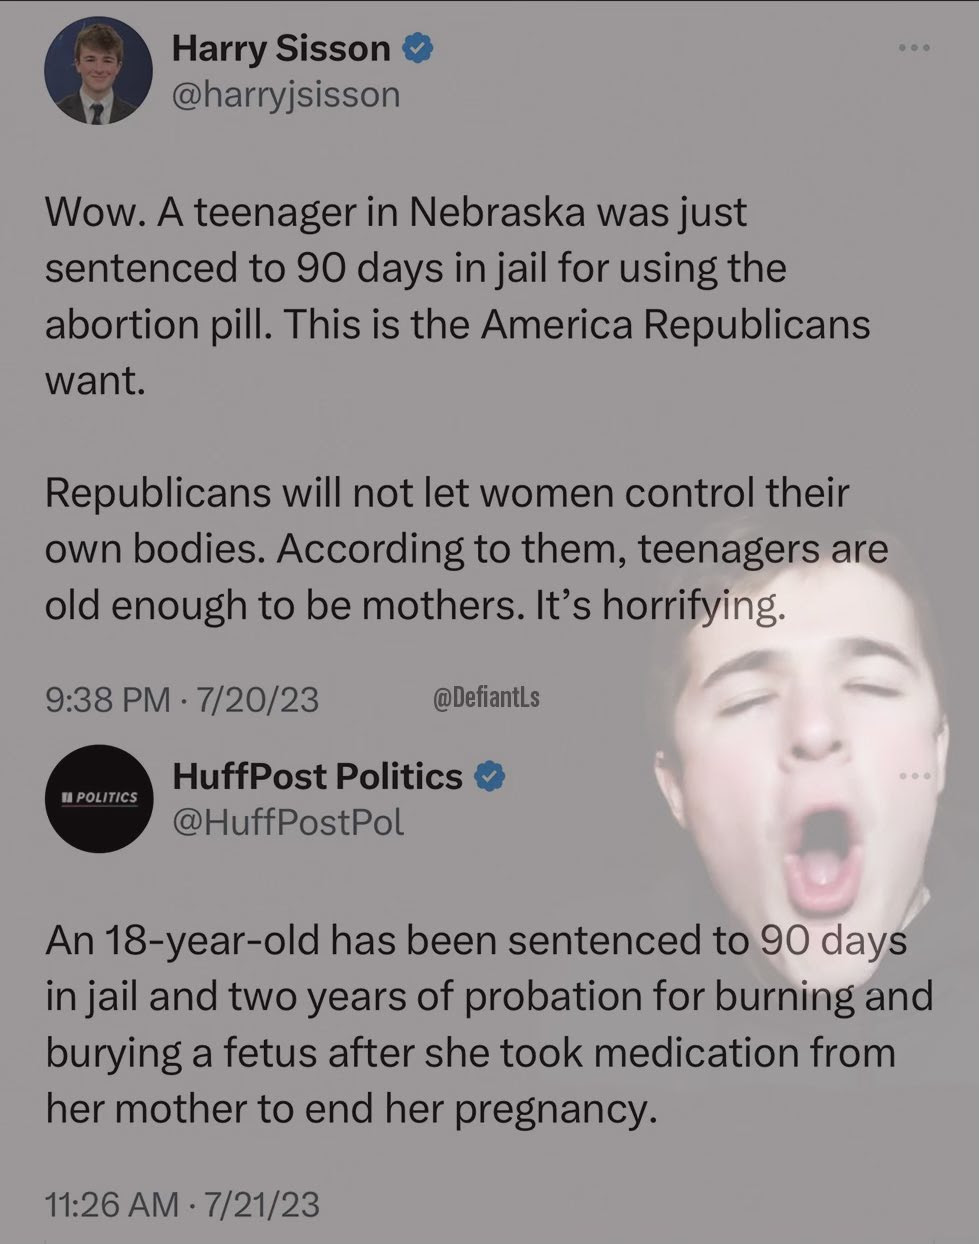 Hypocrite: numerous pro-lifers are moaning that a girl was jailed for using the abortion pill when she was in fact jailed for burning and burying her aborted fetus.